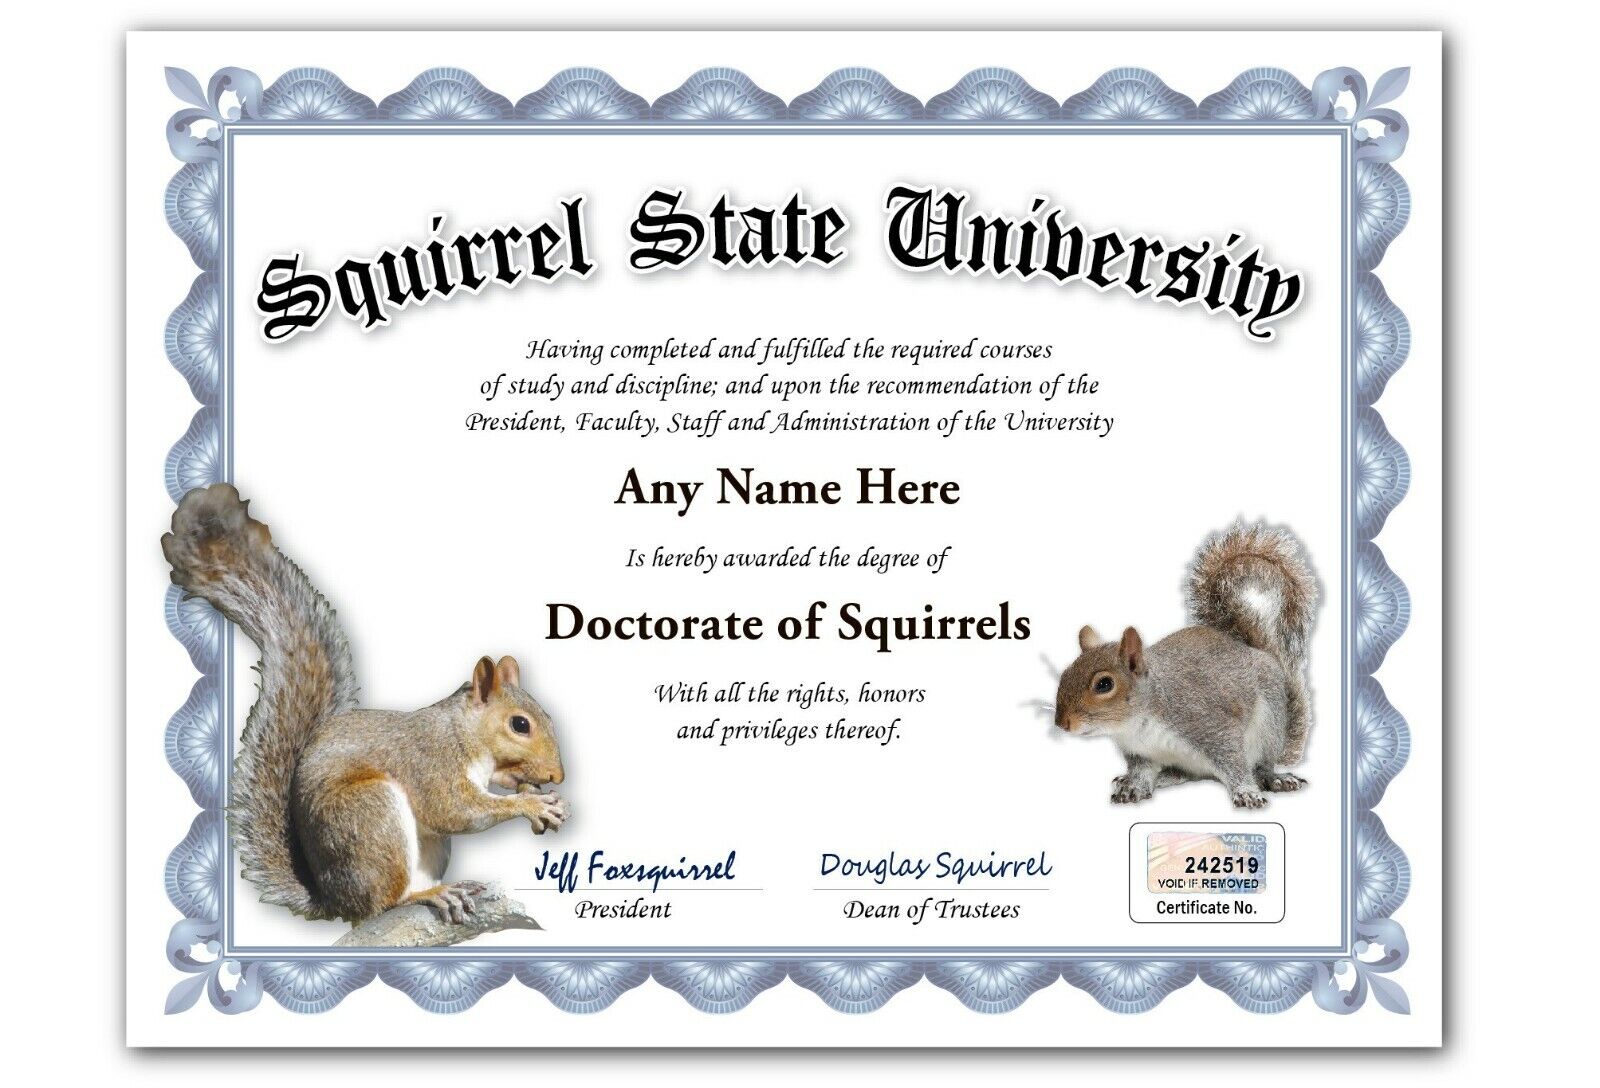 Squirrel State University Personalized Diploma w/ Gold Seal Novelty Funny Gag